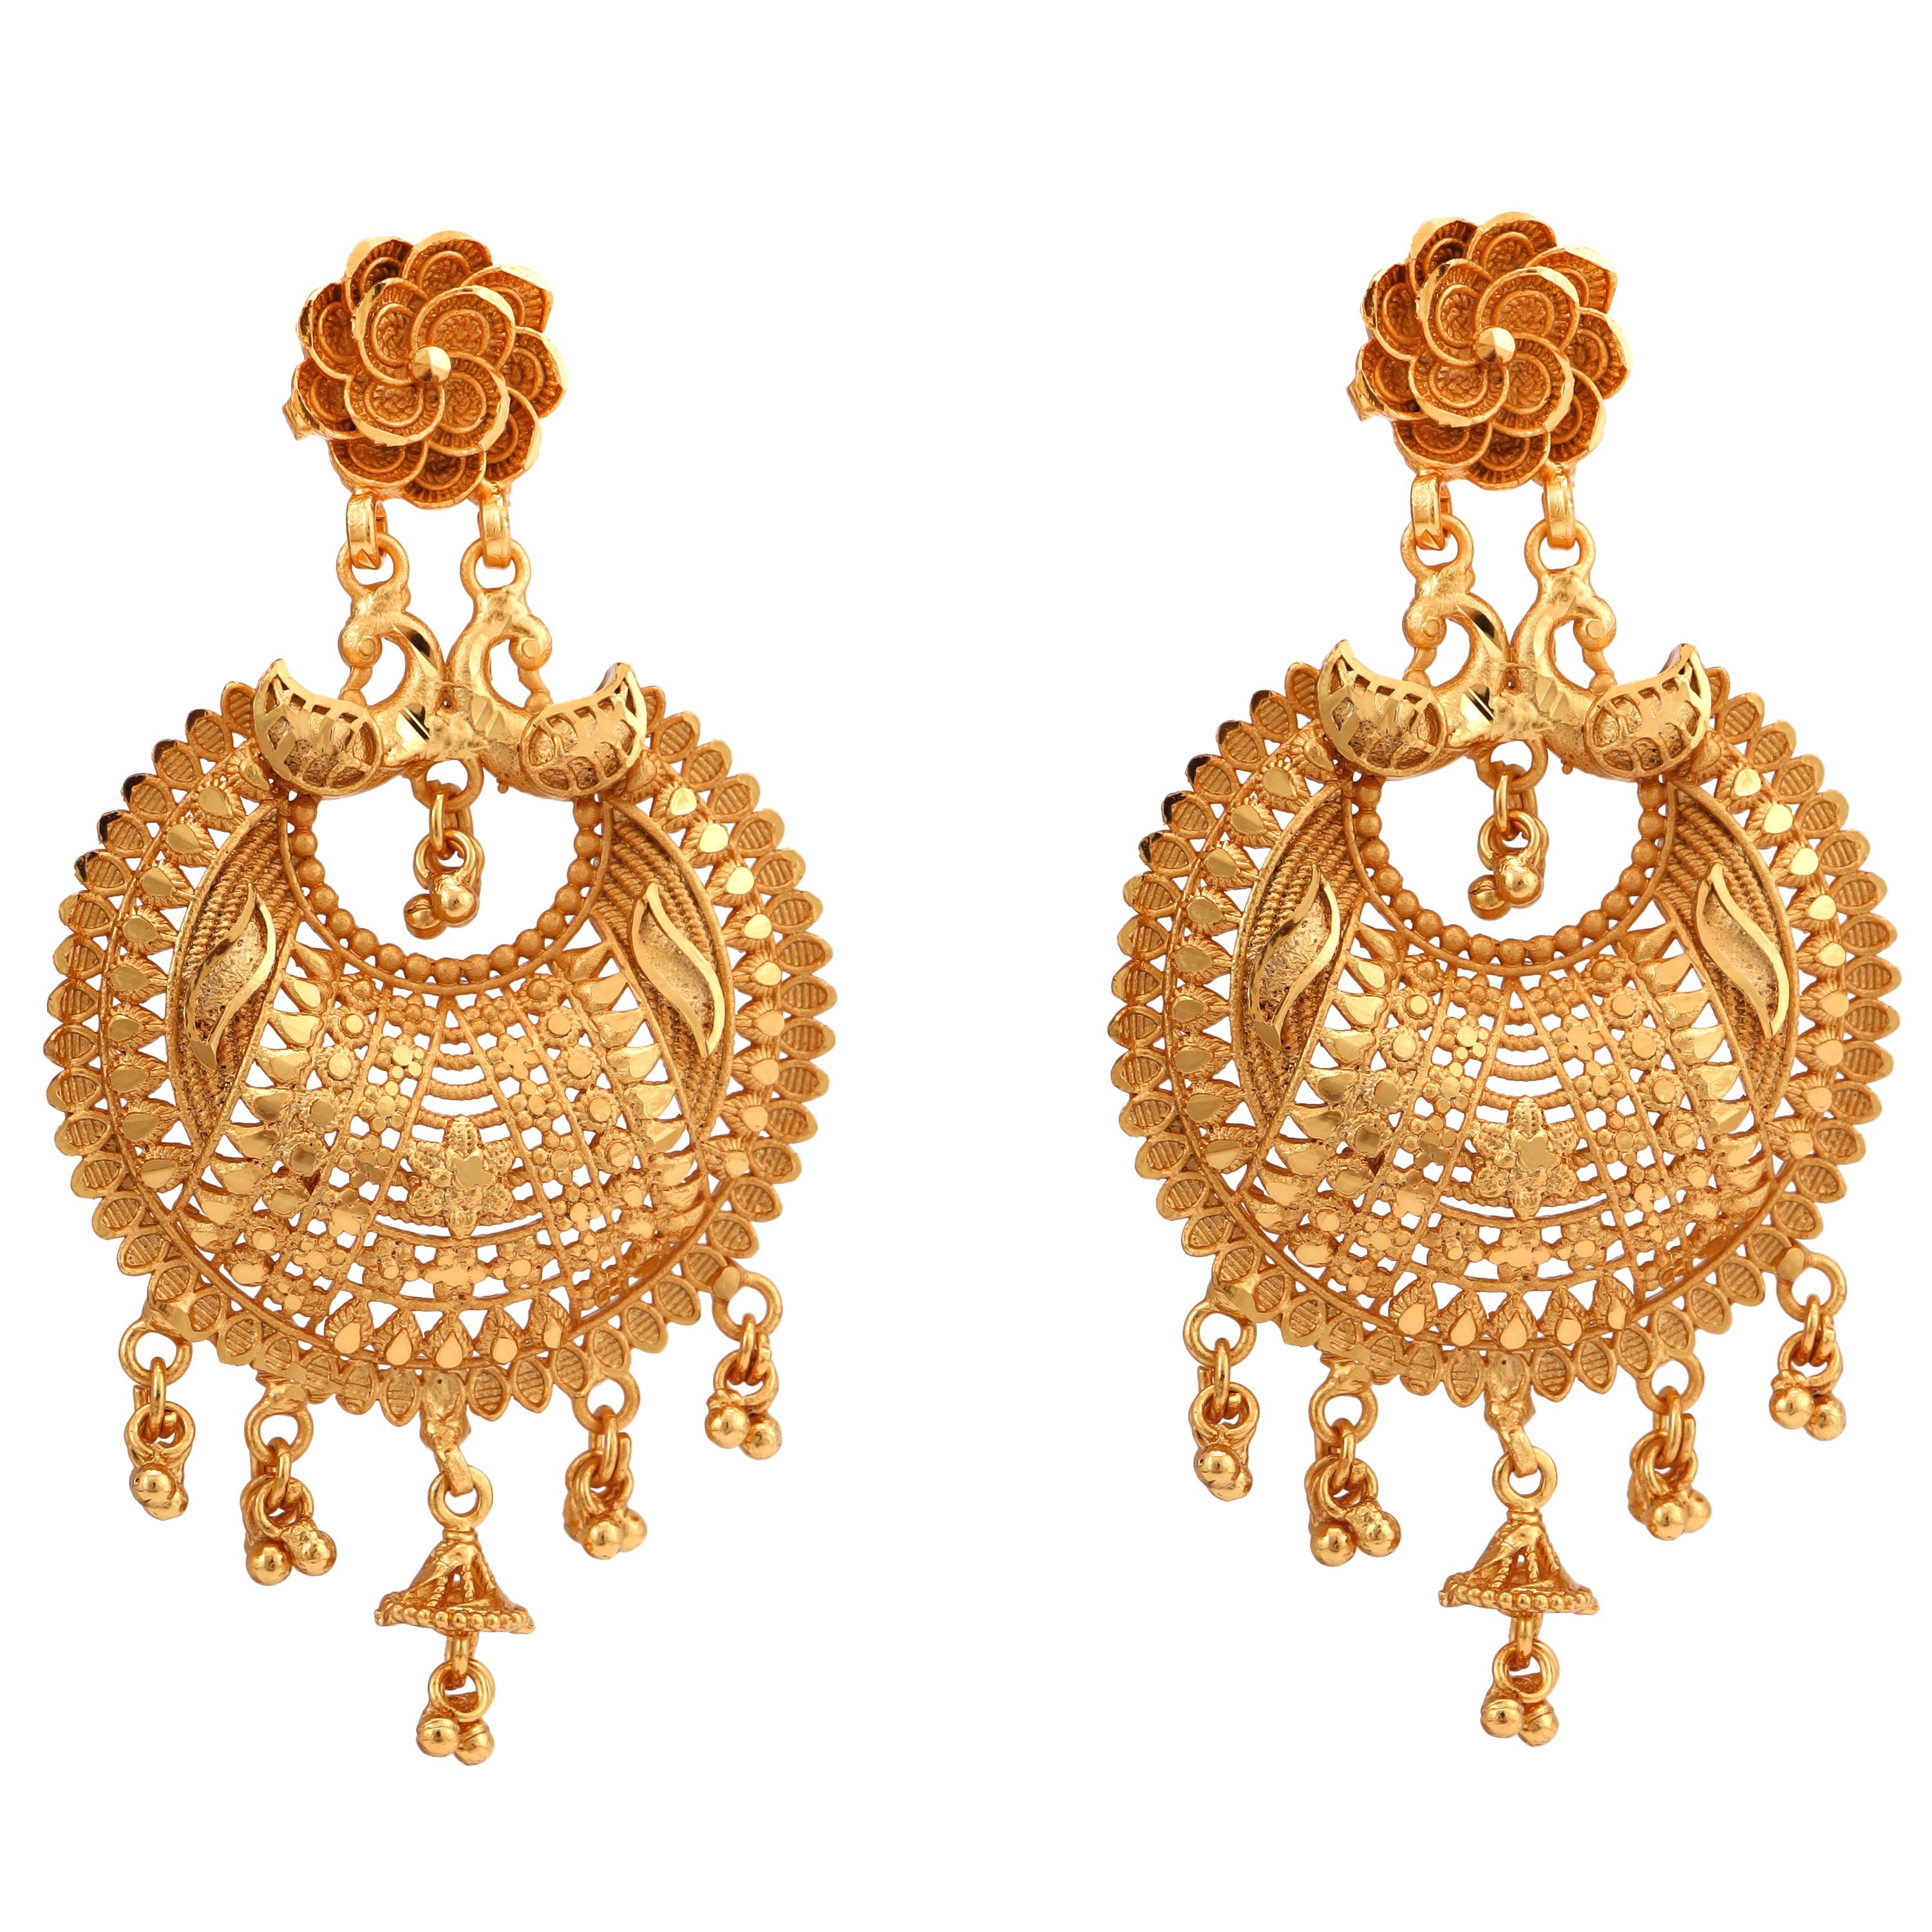 Stunning Gold Drop Earrings Design at Best Price from Senco